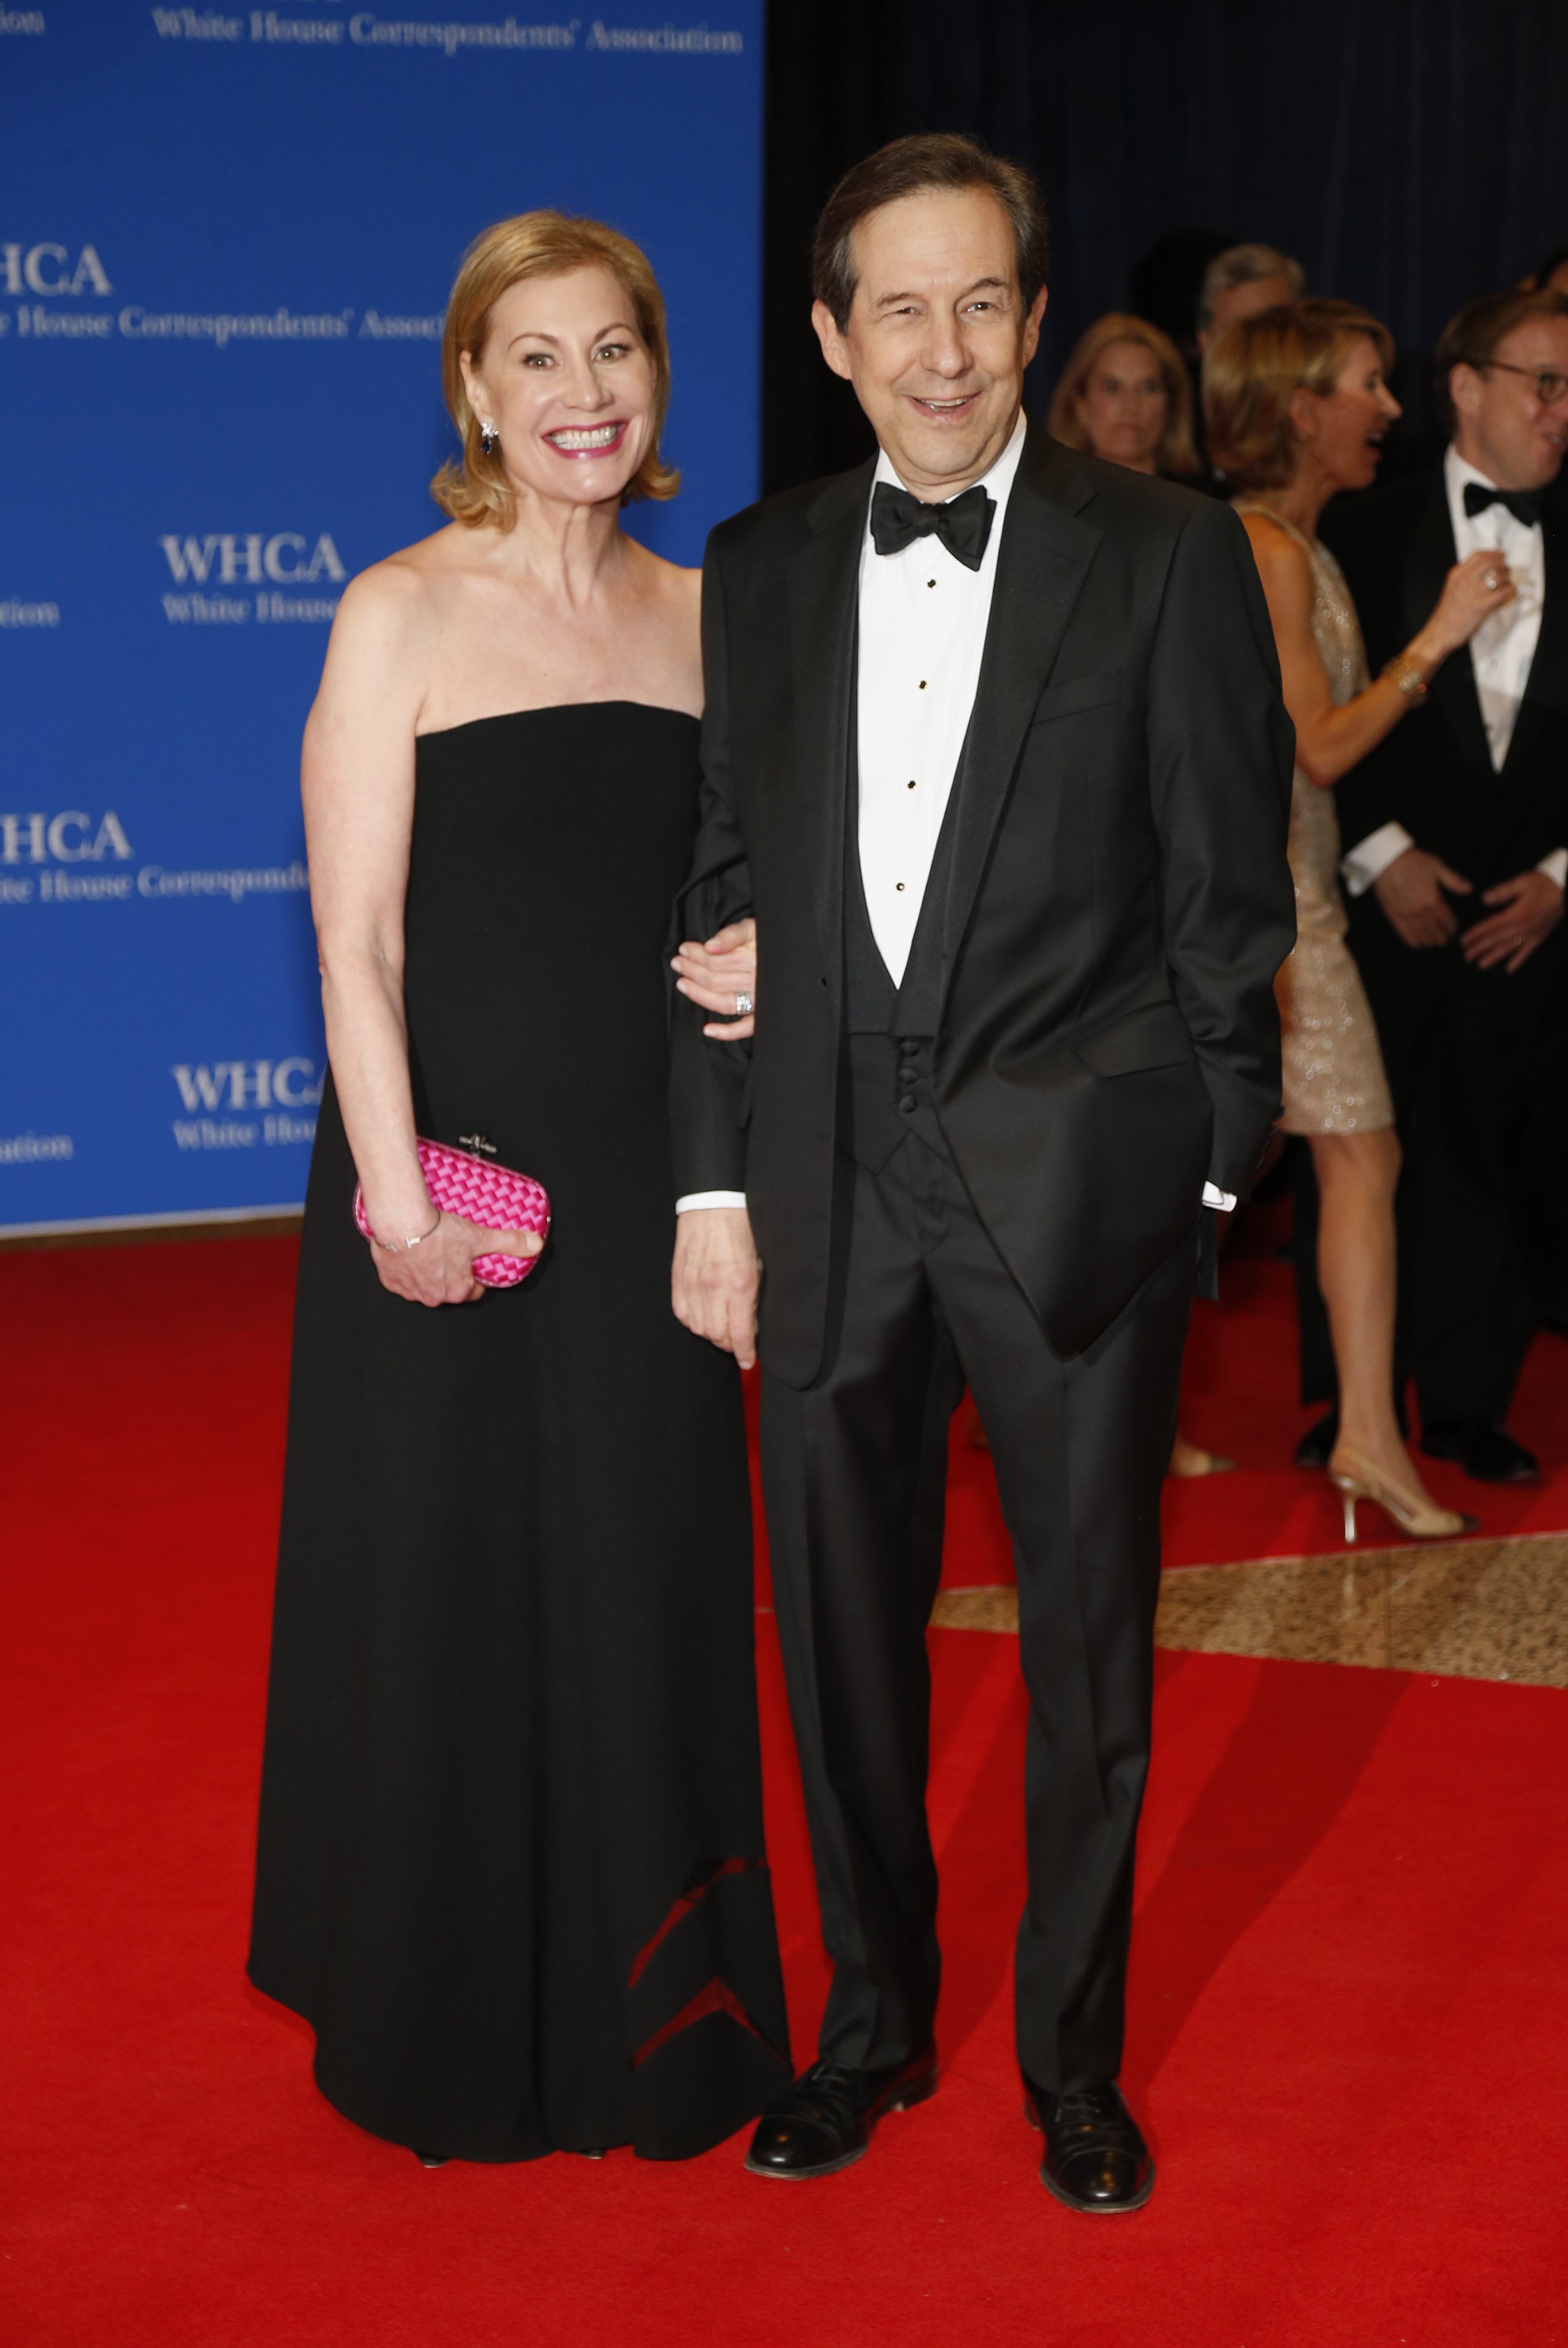 Lorraine Martin Smothers and Chris Wallace are pictured as they arrive for the White House Correspondents' Association (WHCA) dinner on April 30, 2016, in Washington, D.C. | Source: Getty Images